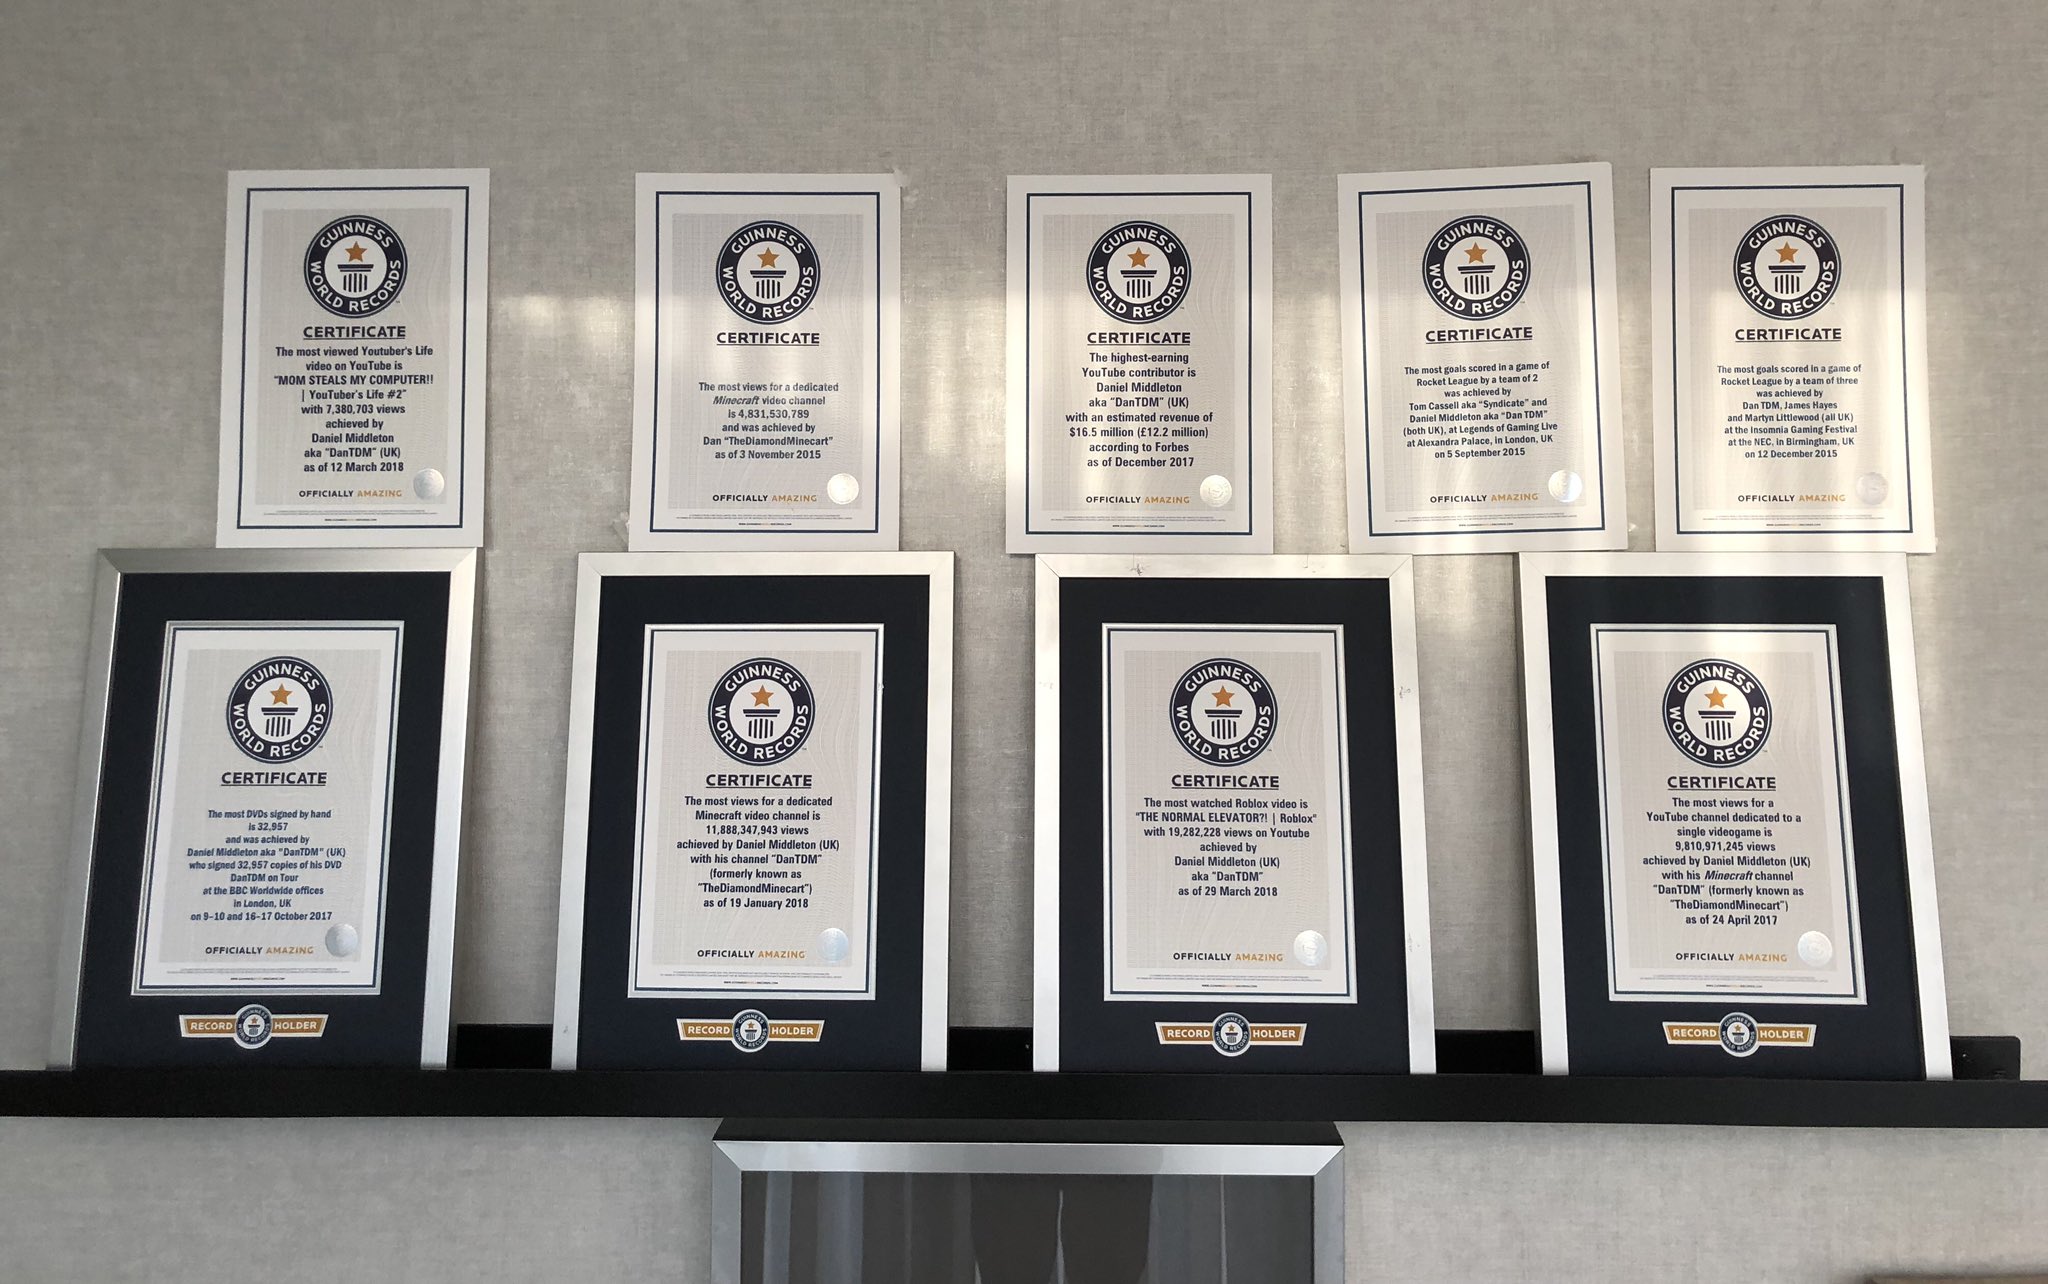 ᴅᴀɴᴛᴅᴍ On Twitter Here Comes A Weird Flex But Okay Got Delivery Of 5 New Guinness World Records Today I Now Have 9 That S Insane Https T Co Uogehmvtl7 - roblox normal elevator code 2017